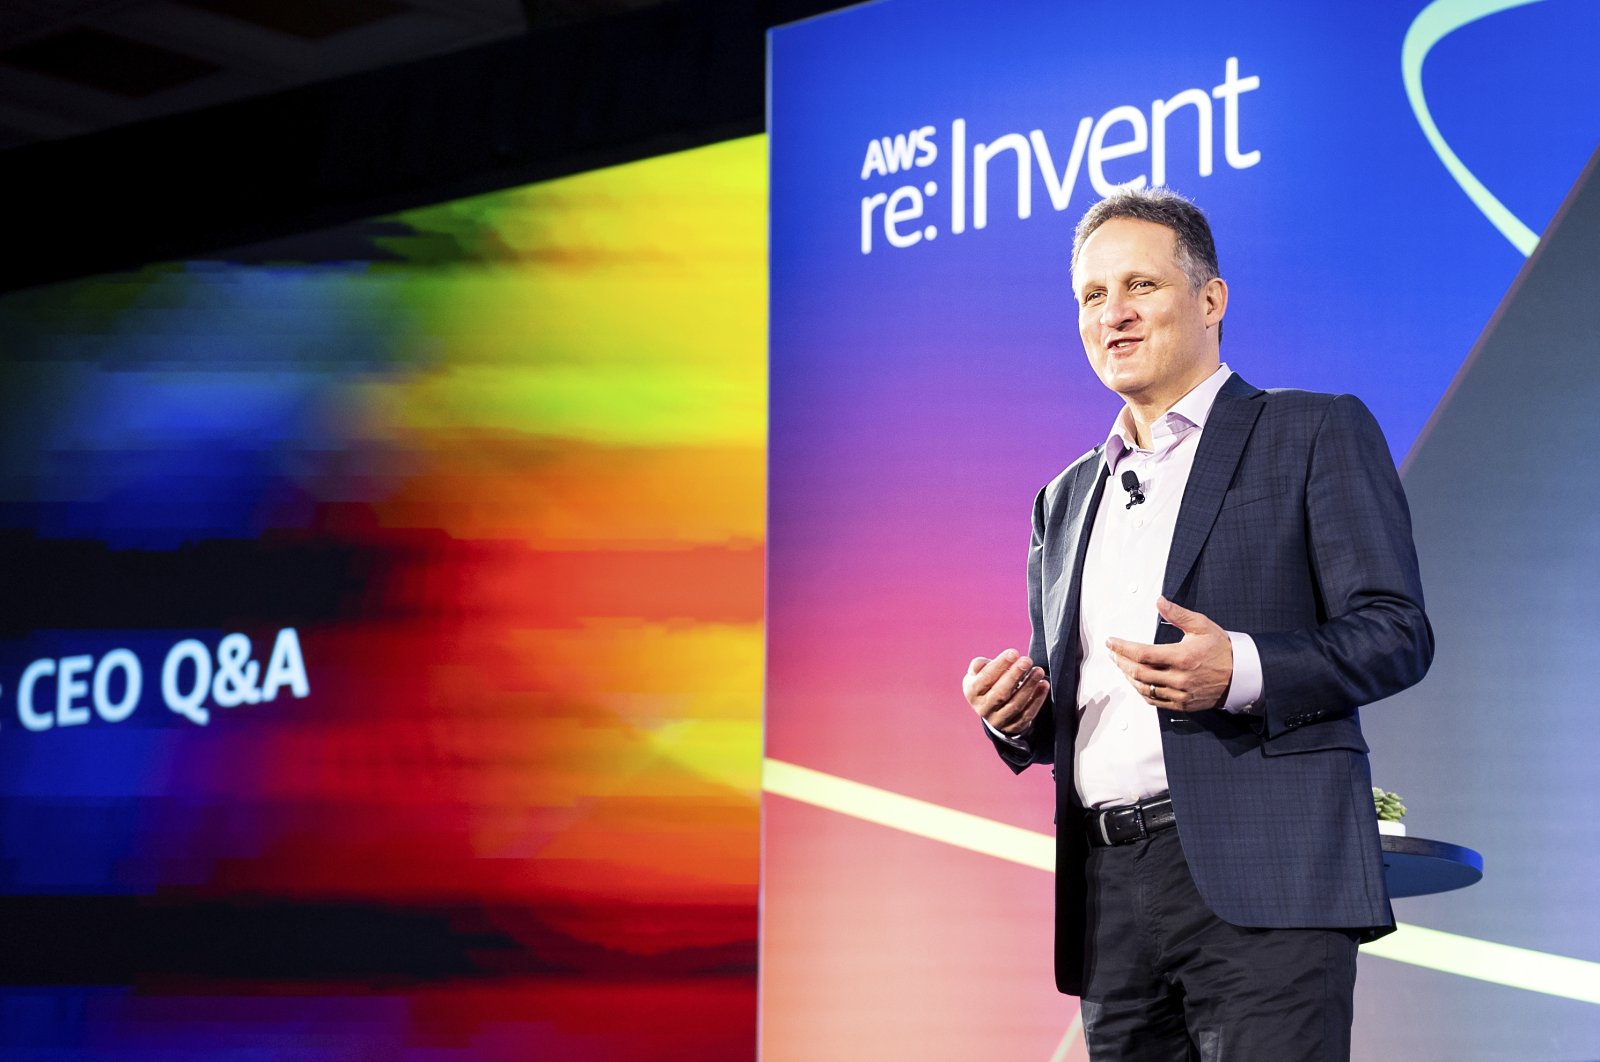 Amazon Web Services (AWS) CEO Adam Selipsky speaks at AWS re:Invent 2022, a conference hosted by Amazon Web Services, Nov. 30, 2022, in Las Vegas, U.S. (AP Photo)